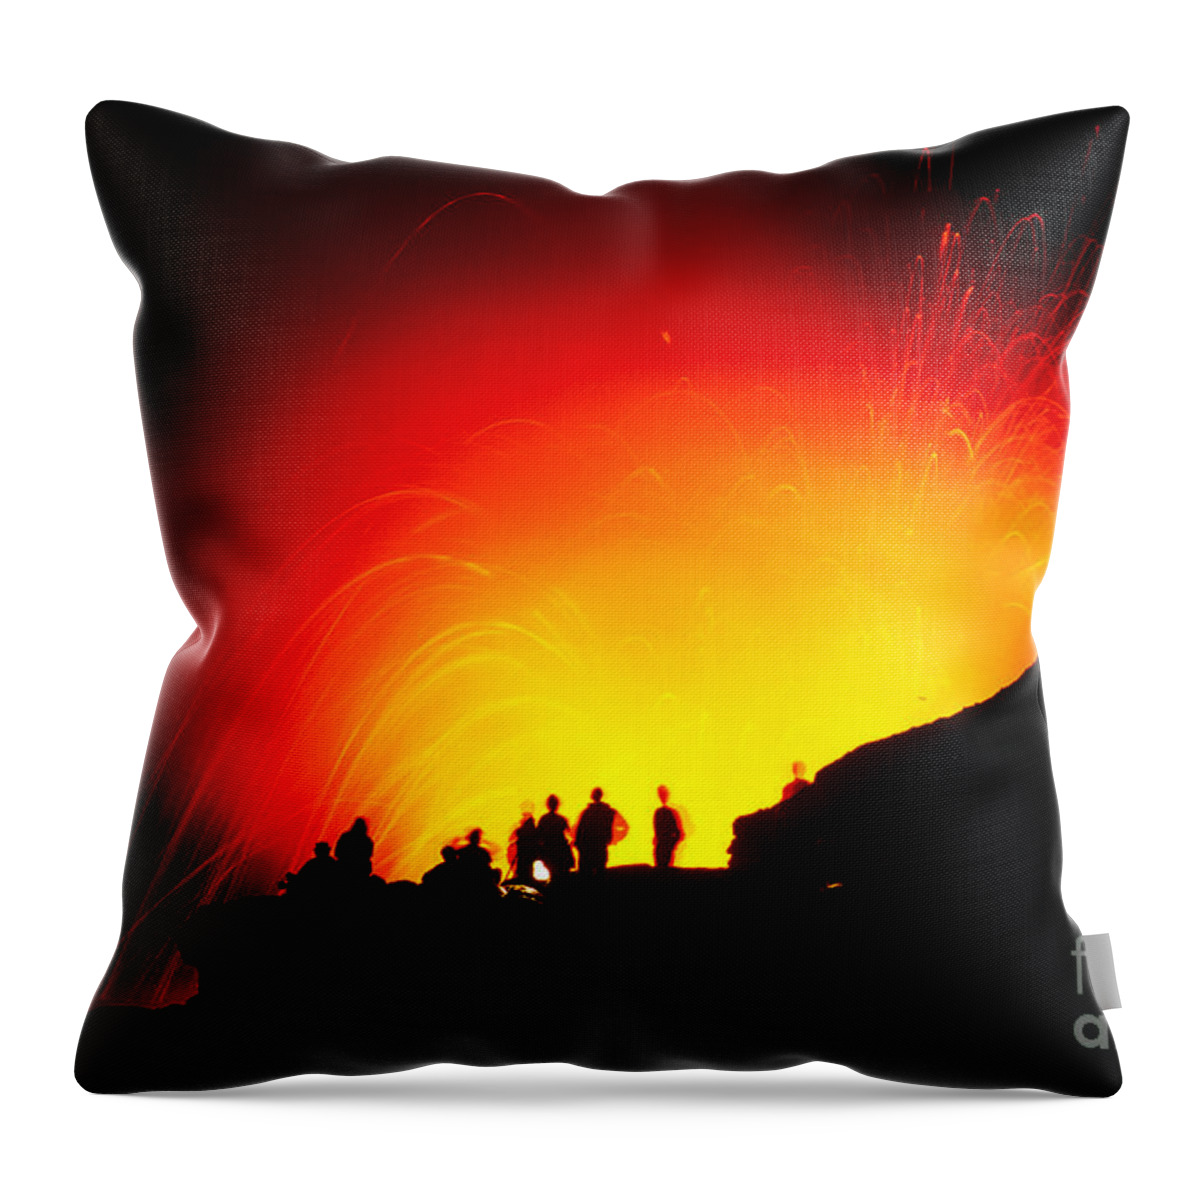 A26g Throw Pillow featuring the photograph Watching The Lava Flow #1 by Erik Aeder - Printscapes